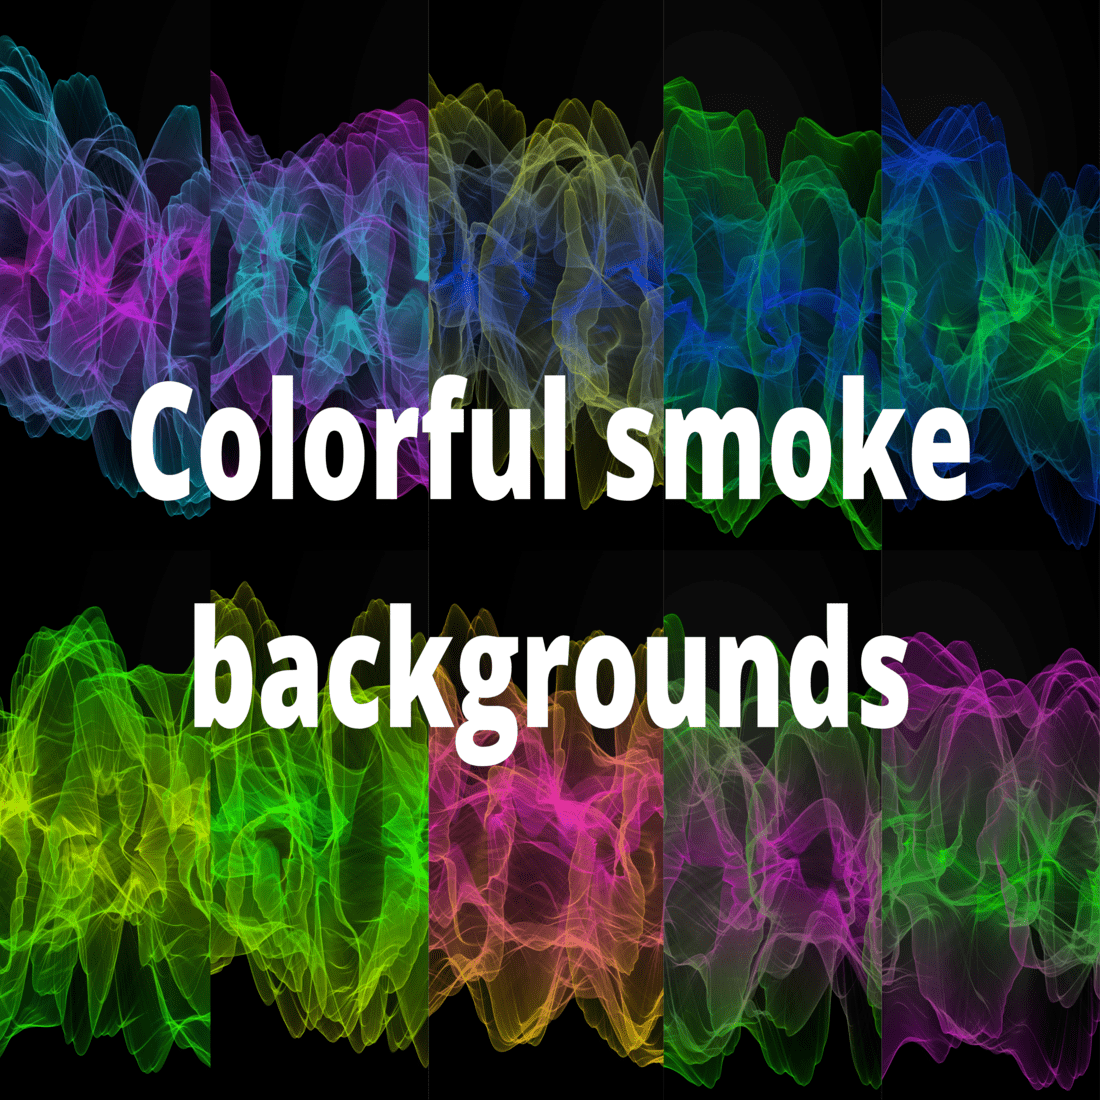 Colored Smoke Backgrounds cover image.